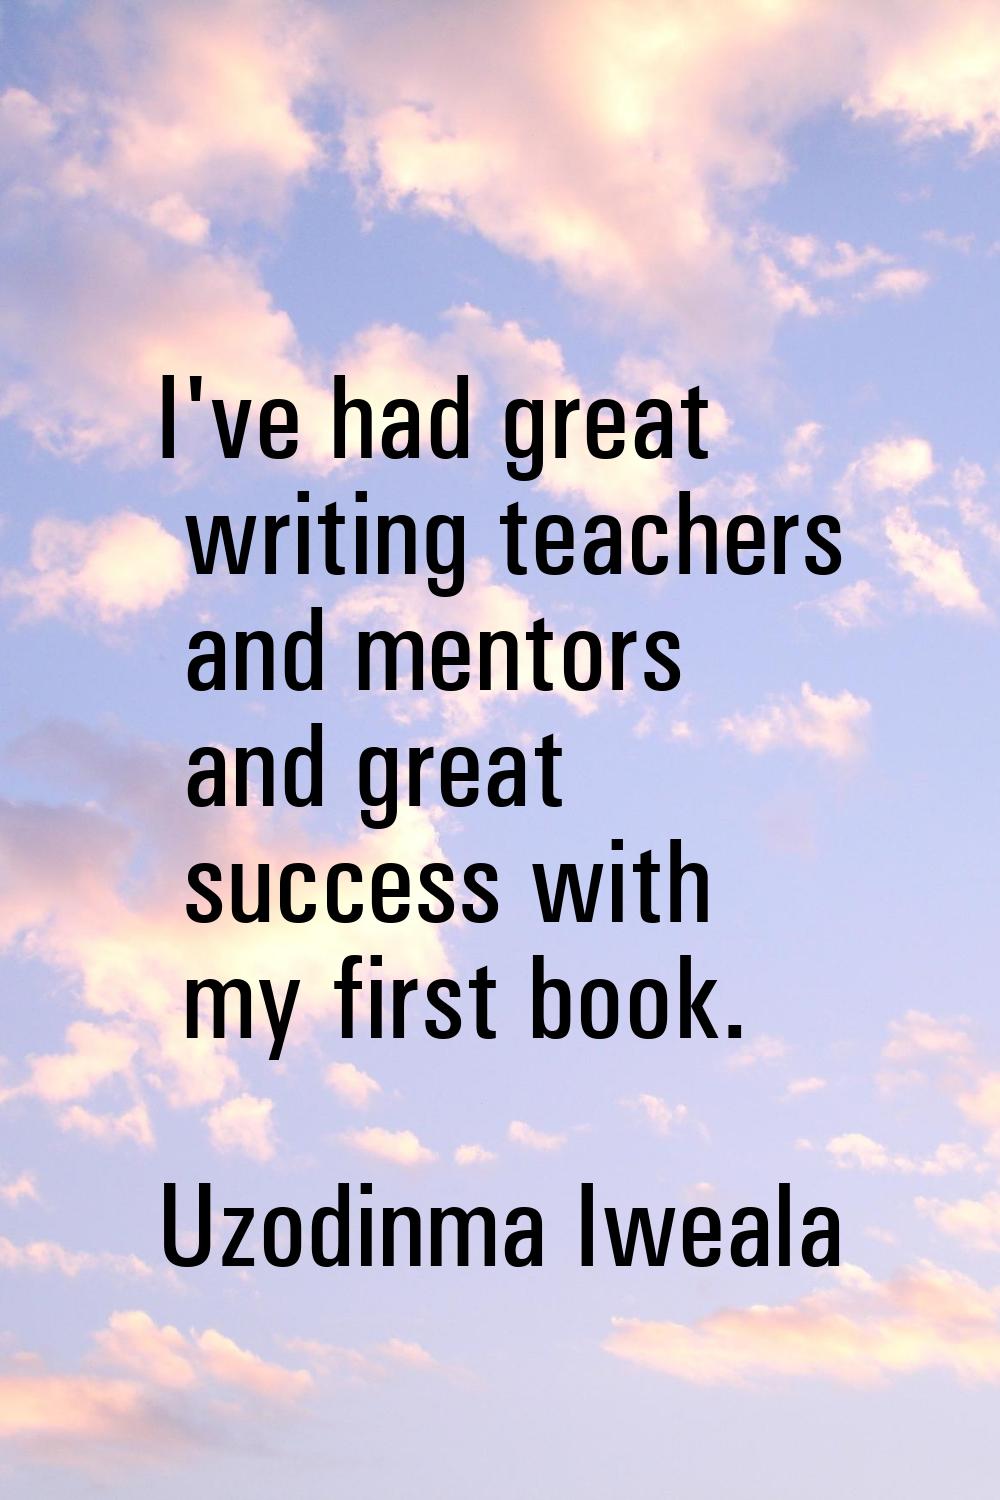 I've had great writing teachers and mentors and great success with my first book.